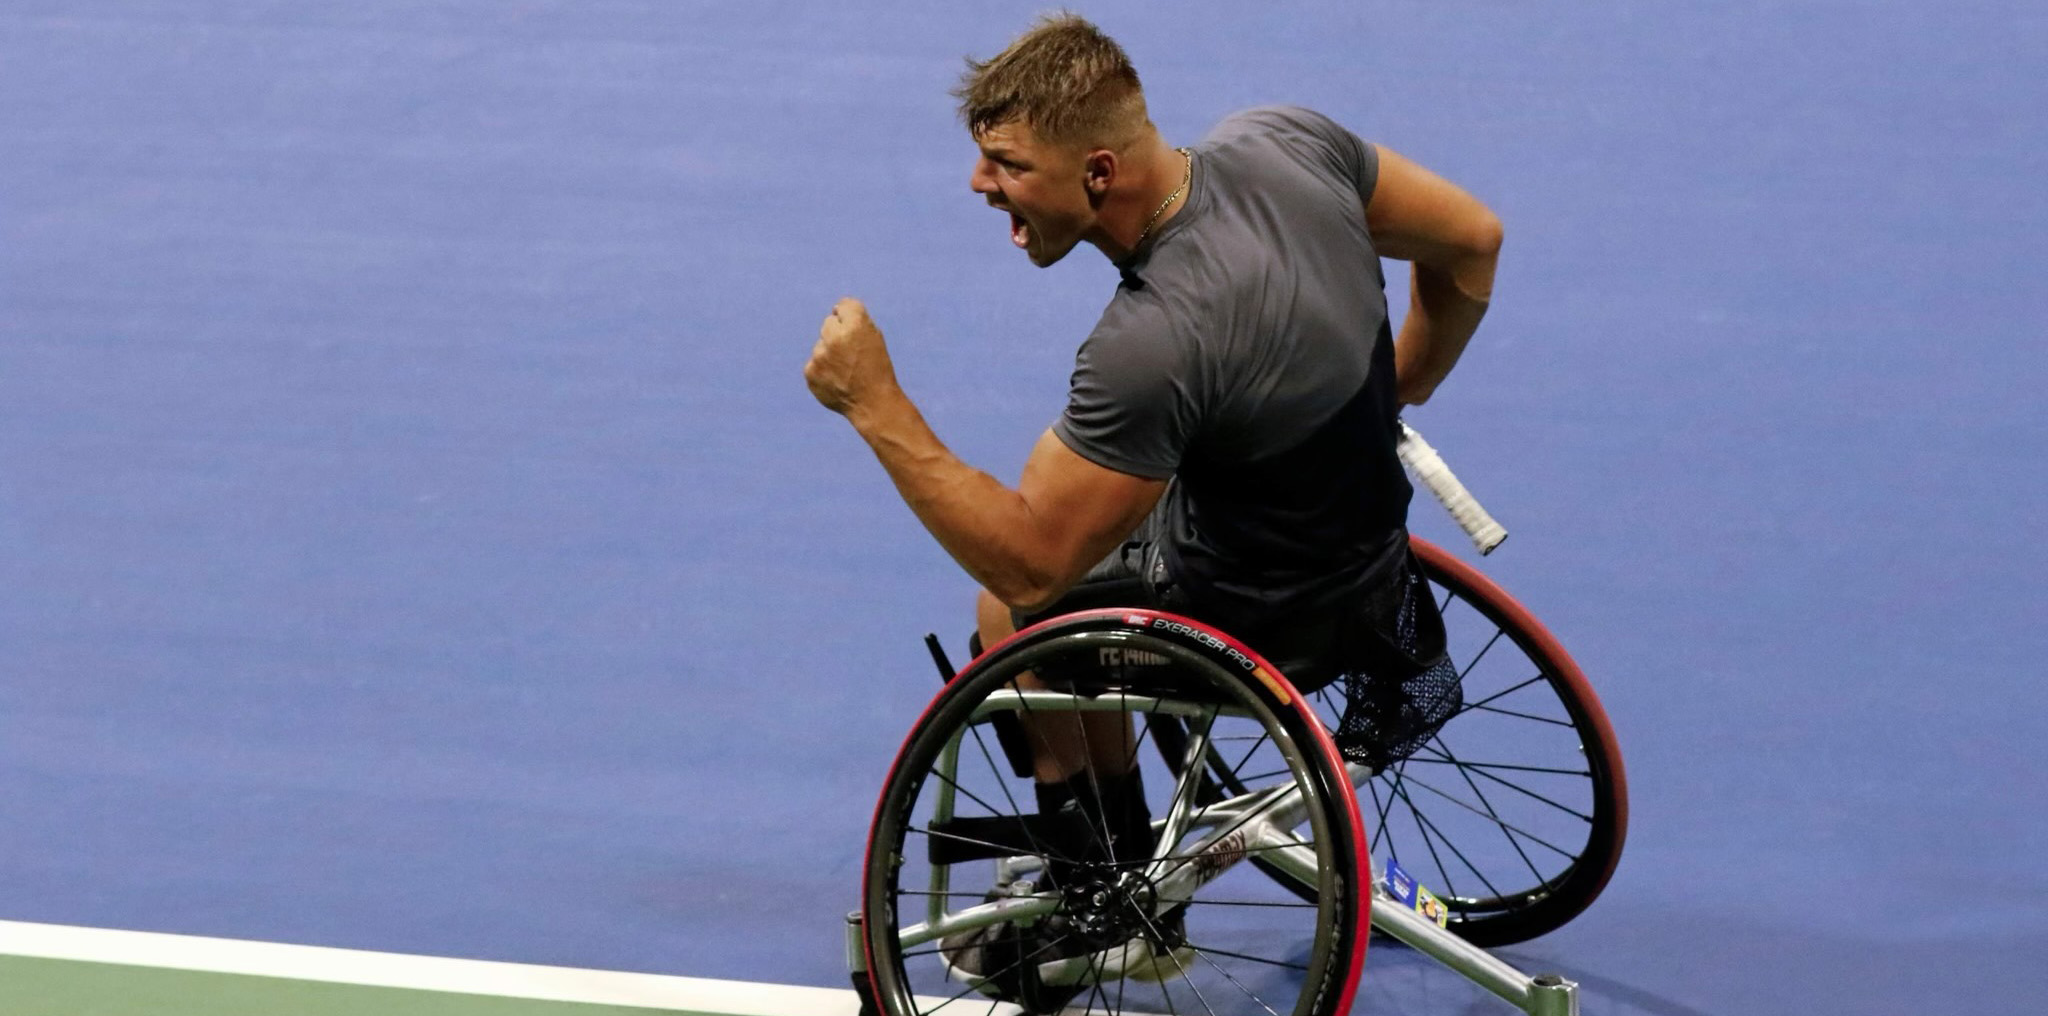 Tomas playing wheelchair tennis at the US Open clinching his fist in celebration